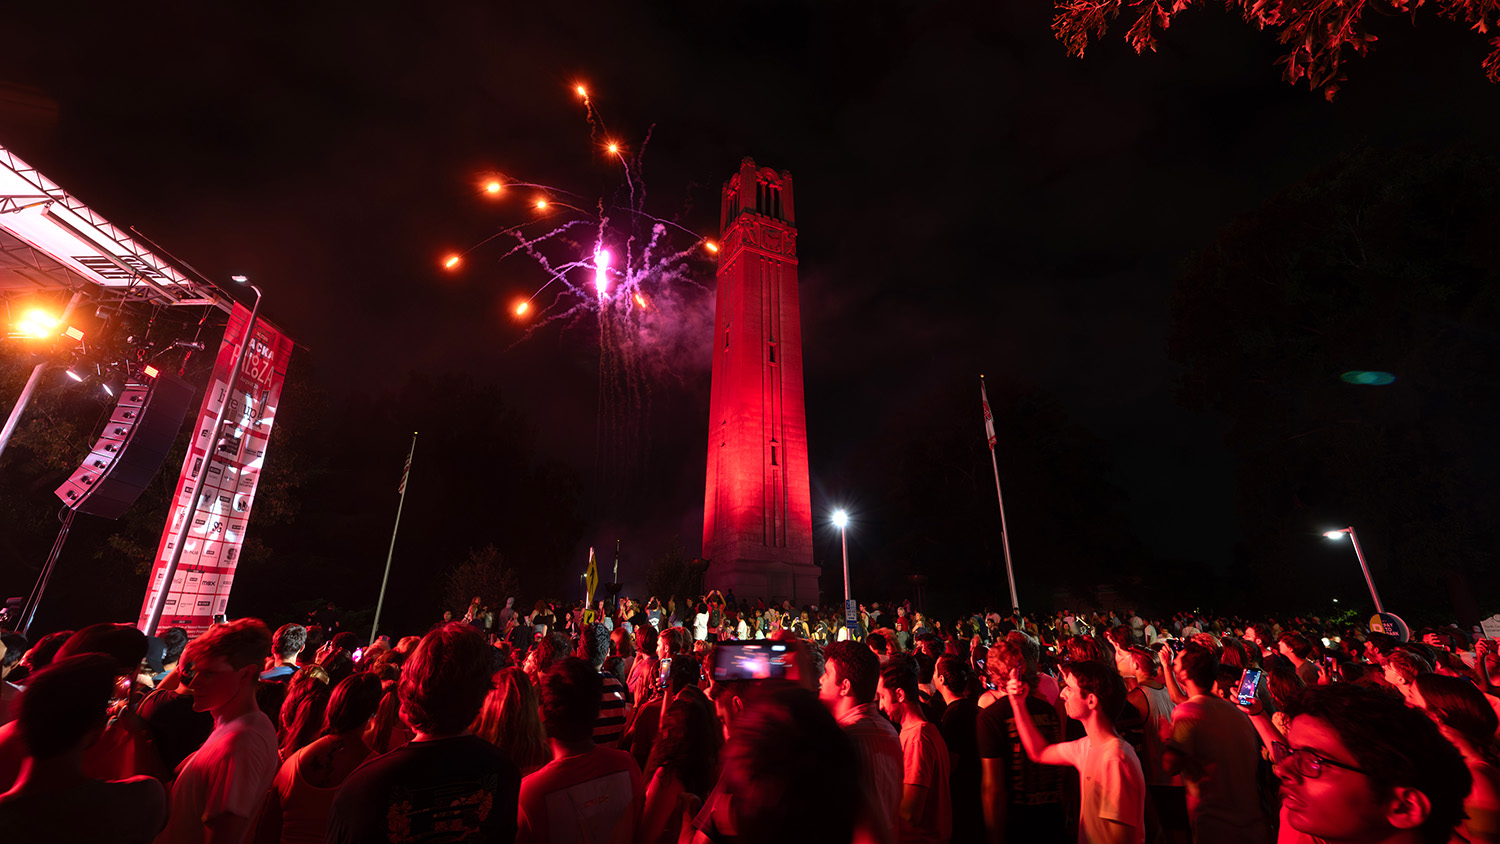 Fireworks light up the sky behind the Belltower at Packapalooza.